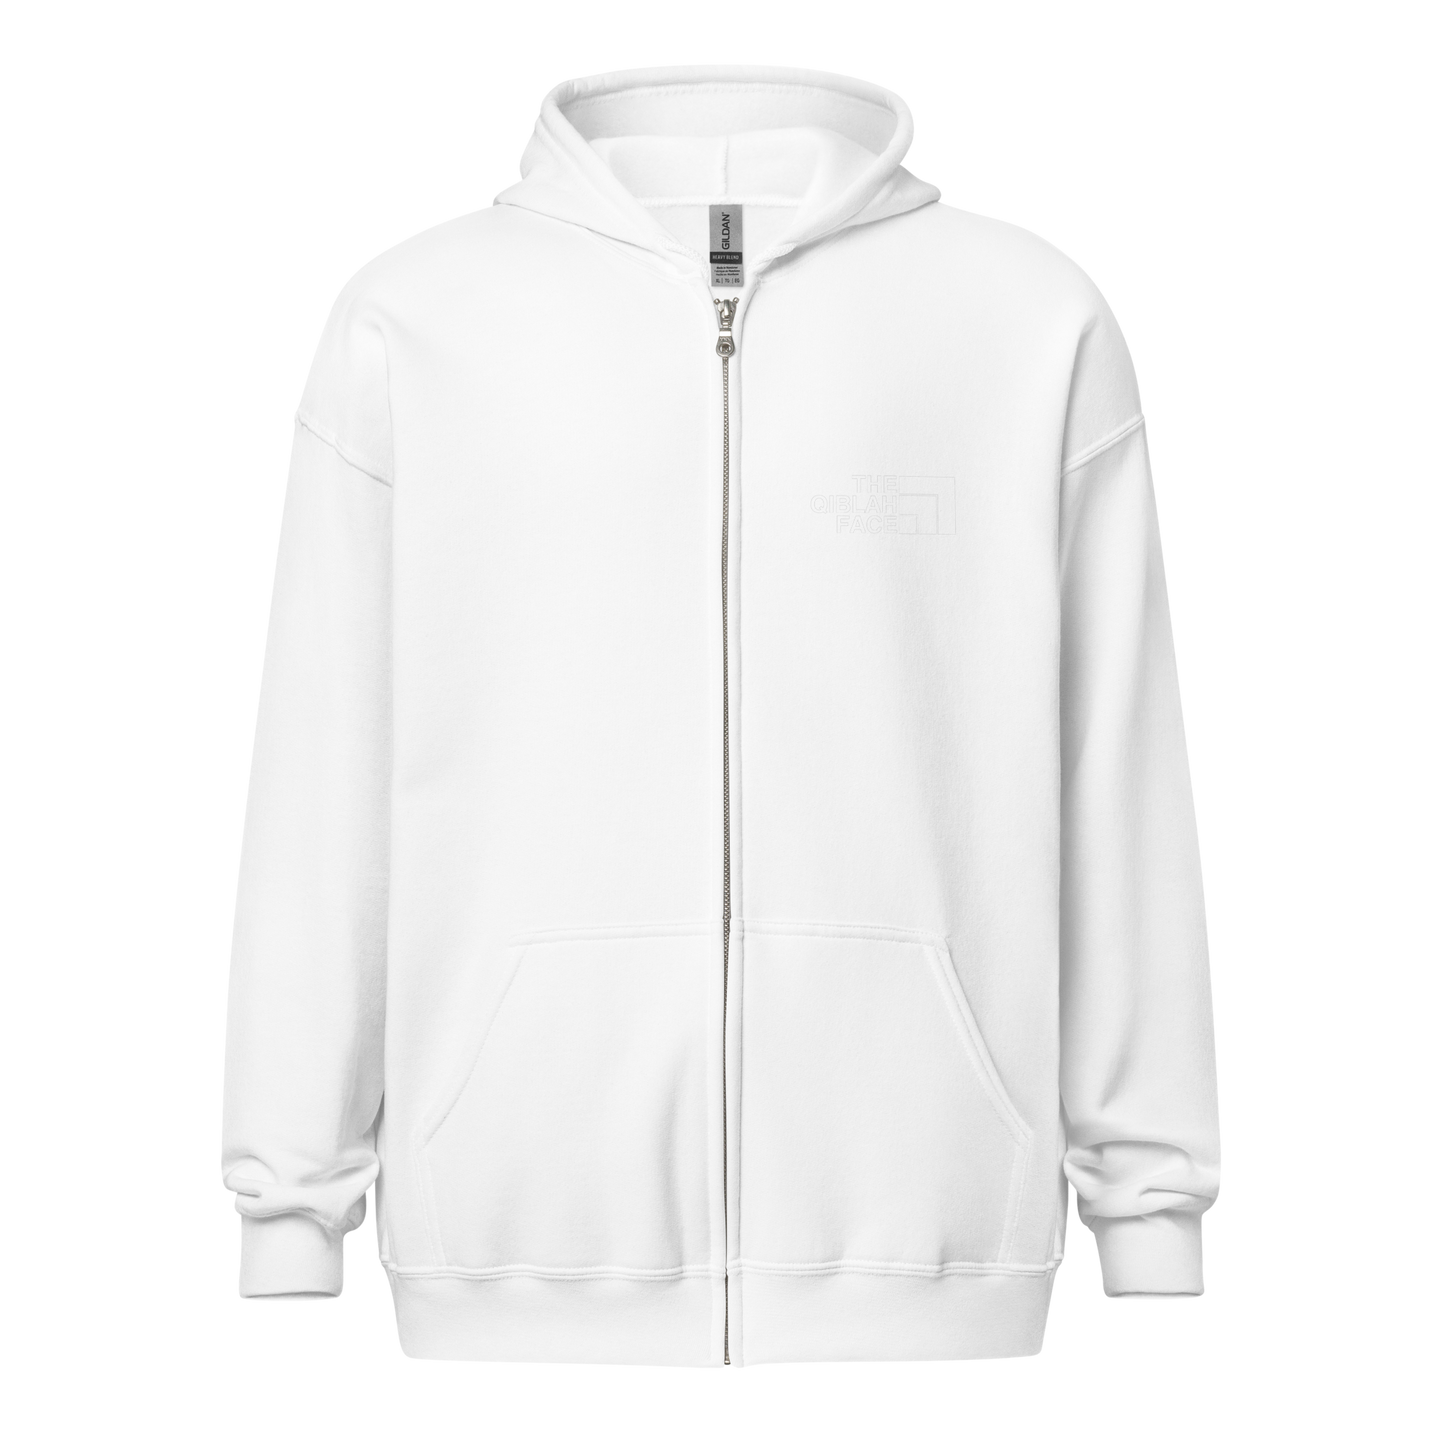 HOODIE Zip Heavy Blend (Adult) - THE QIBLAH FACE (Left Chest) w/ LOGO (Back) - White